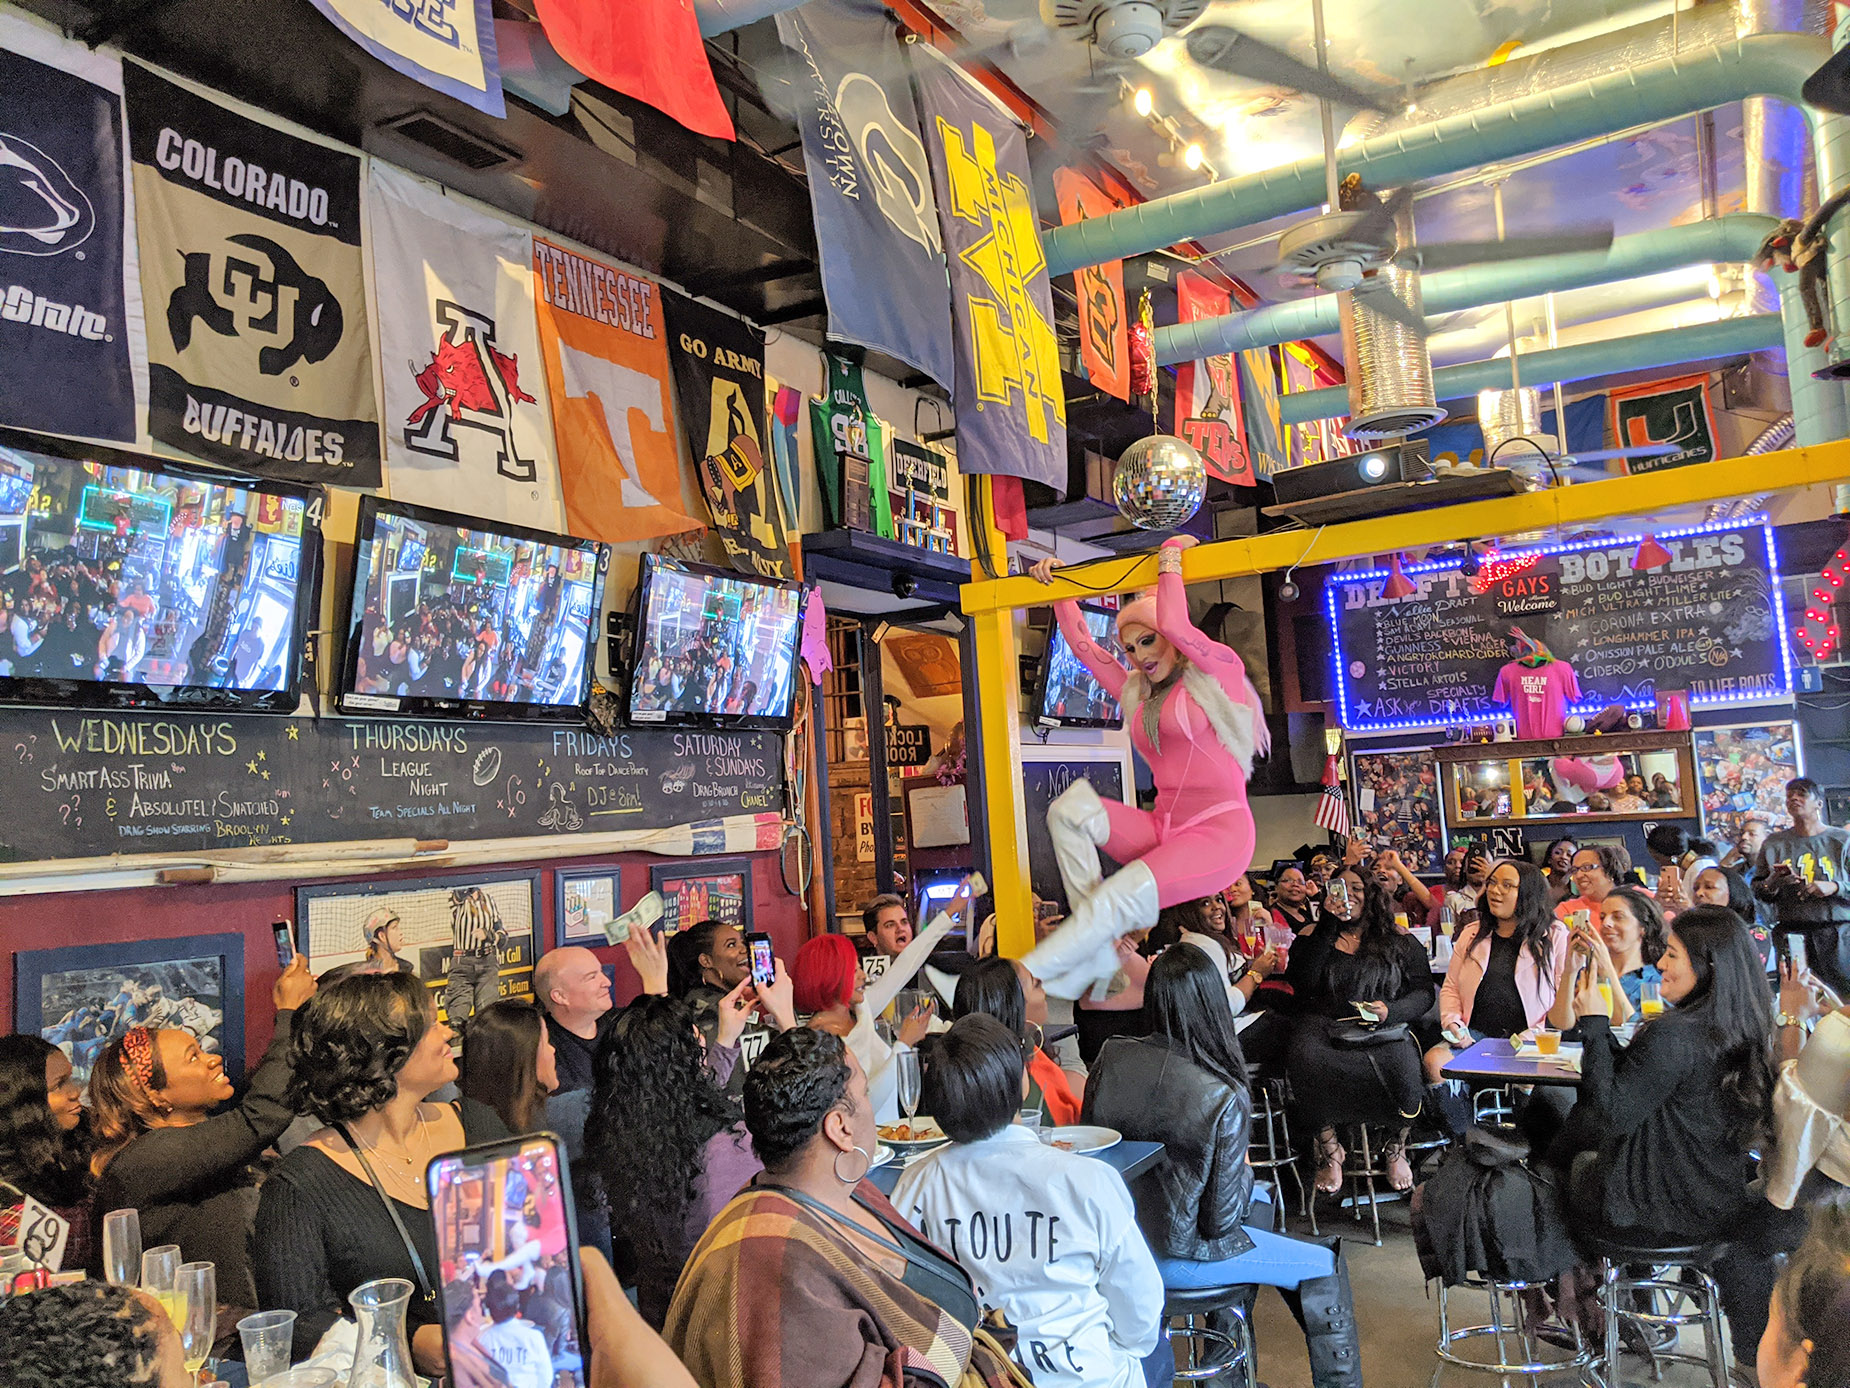 Alexa Shontelle performing at Nellies Drag Brunch in Washington DC